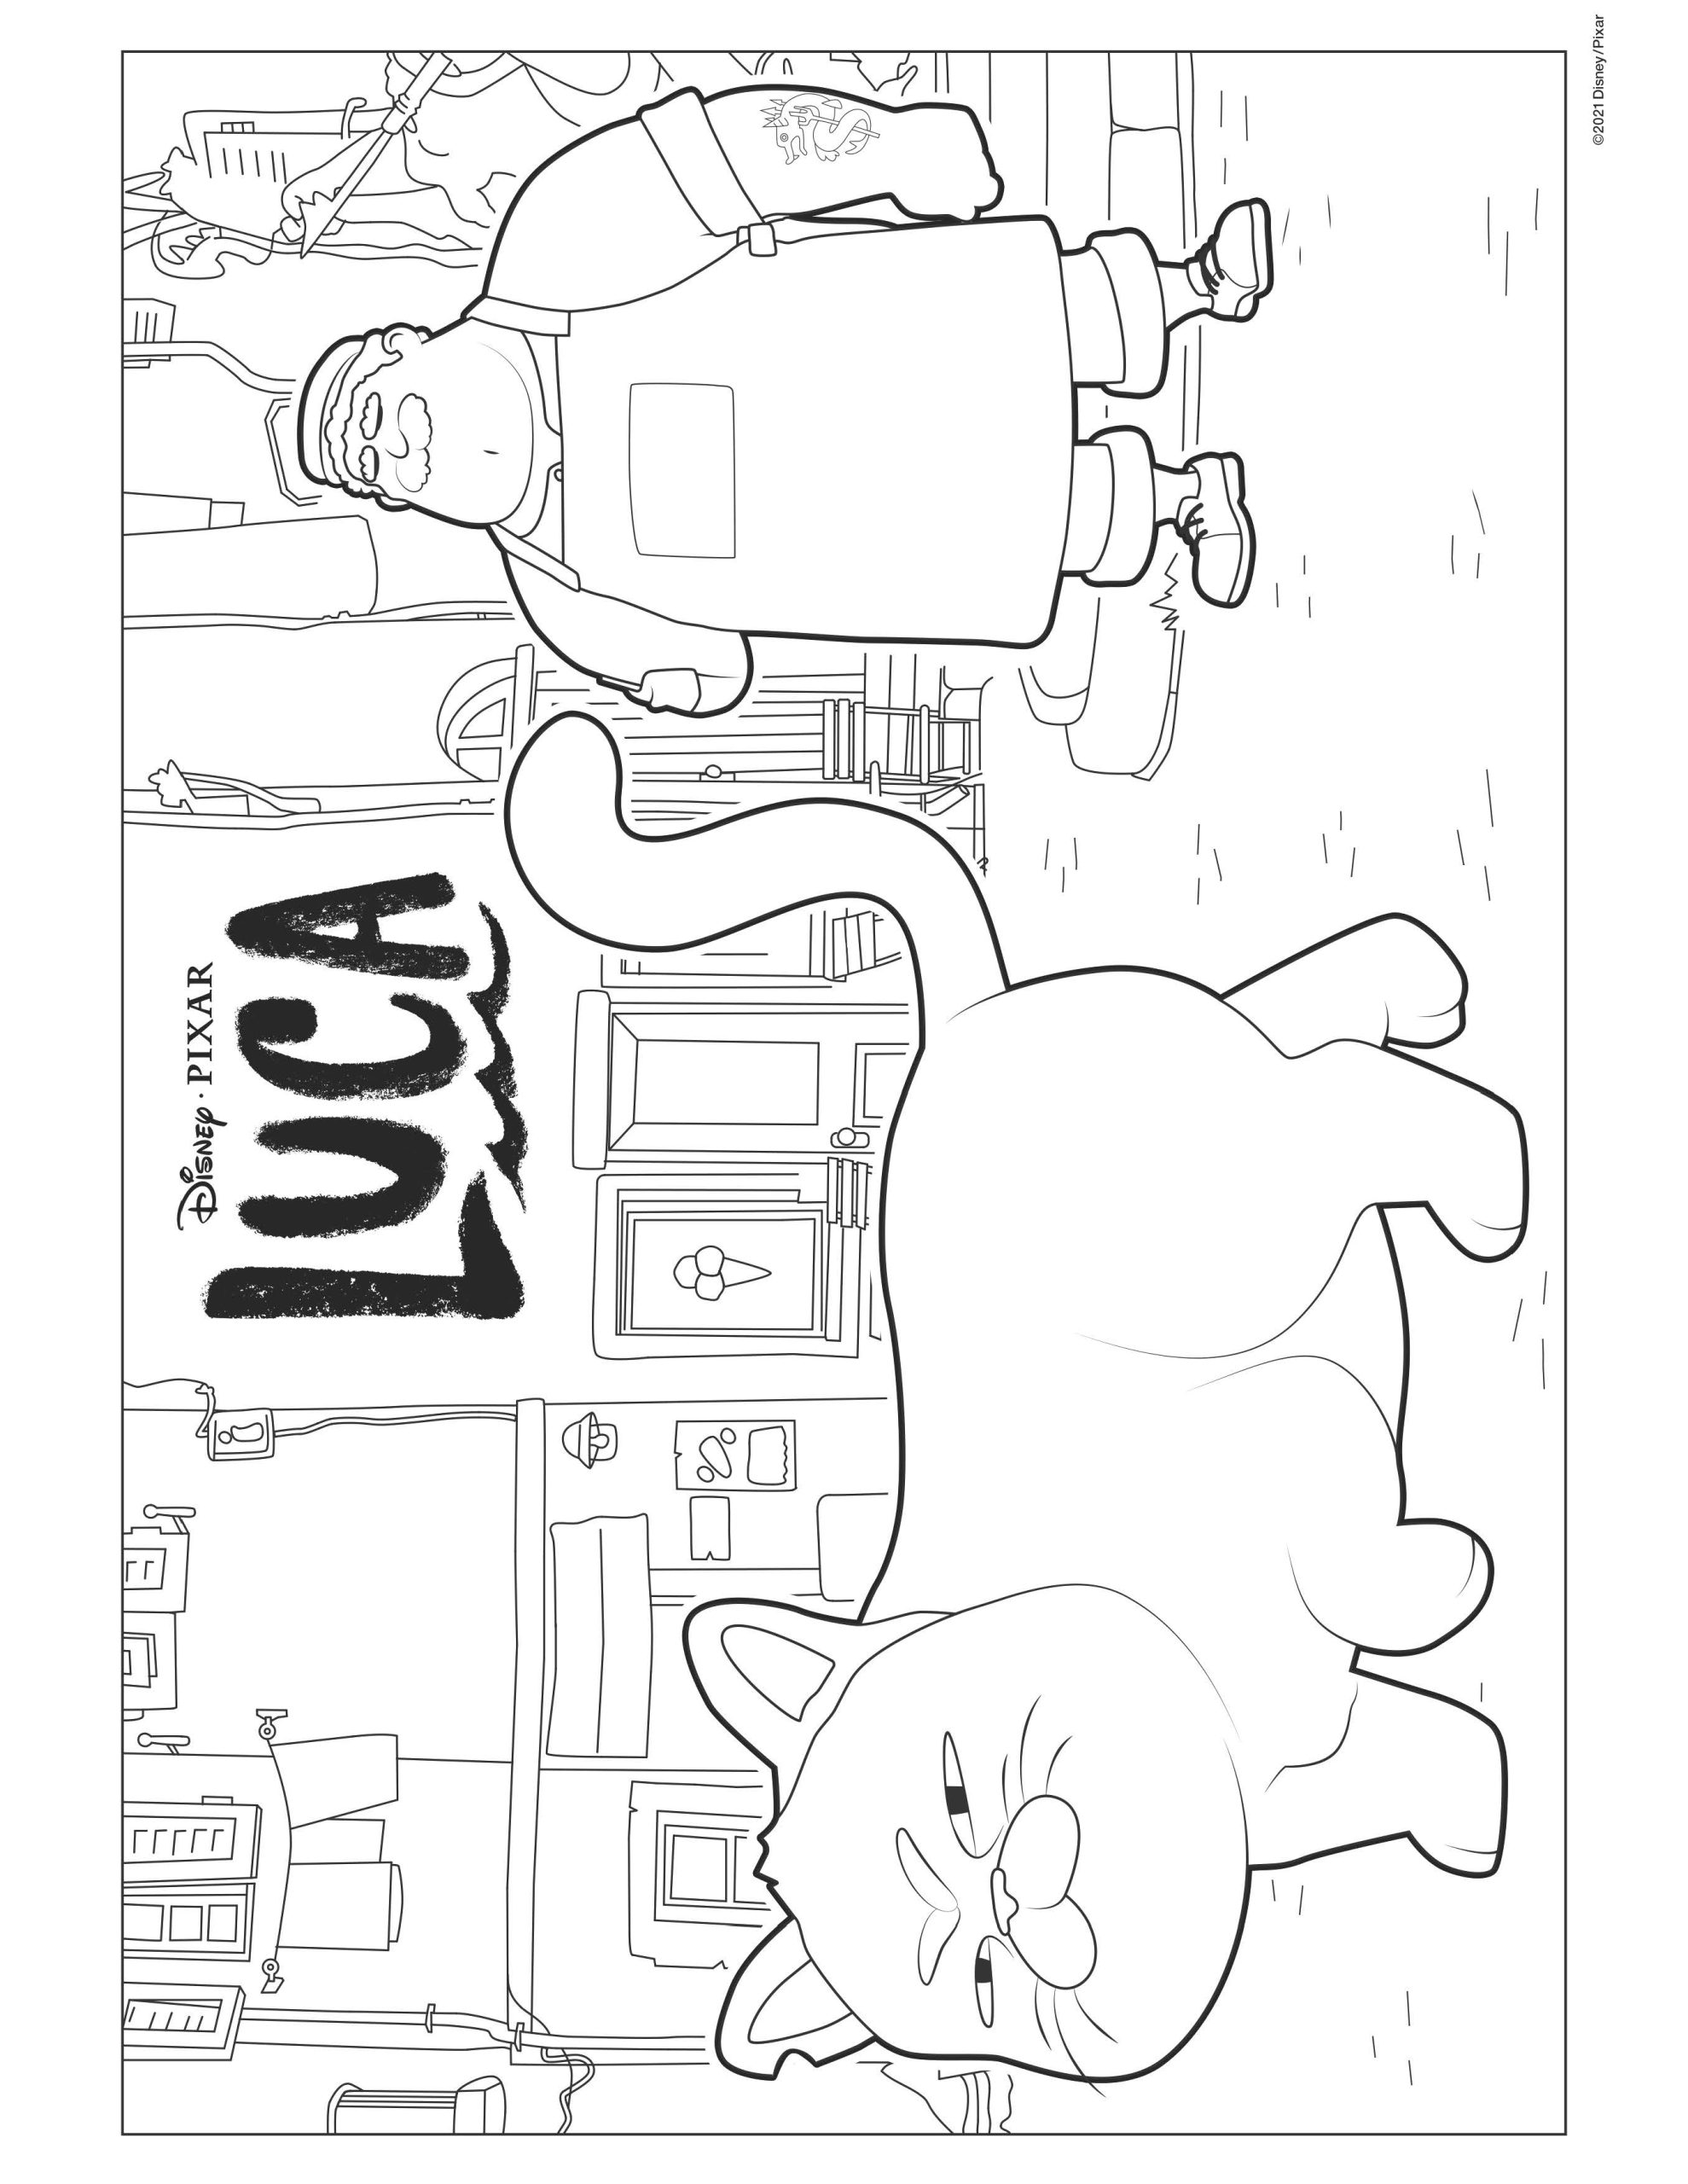 LUCA Now Streaming on Disney+ — FREE Activity Packet